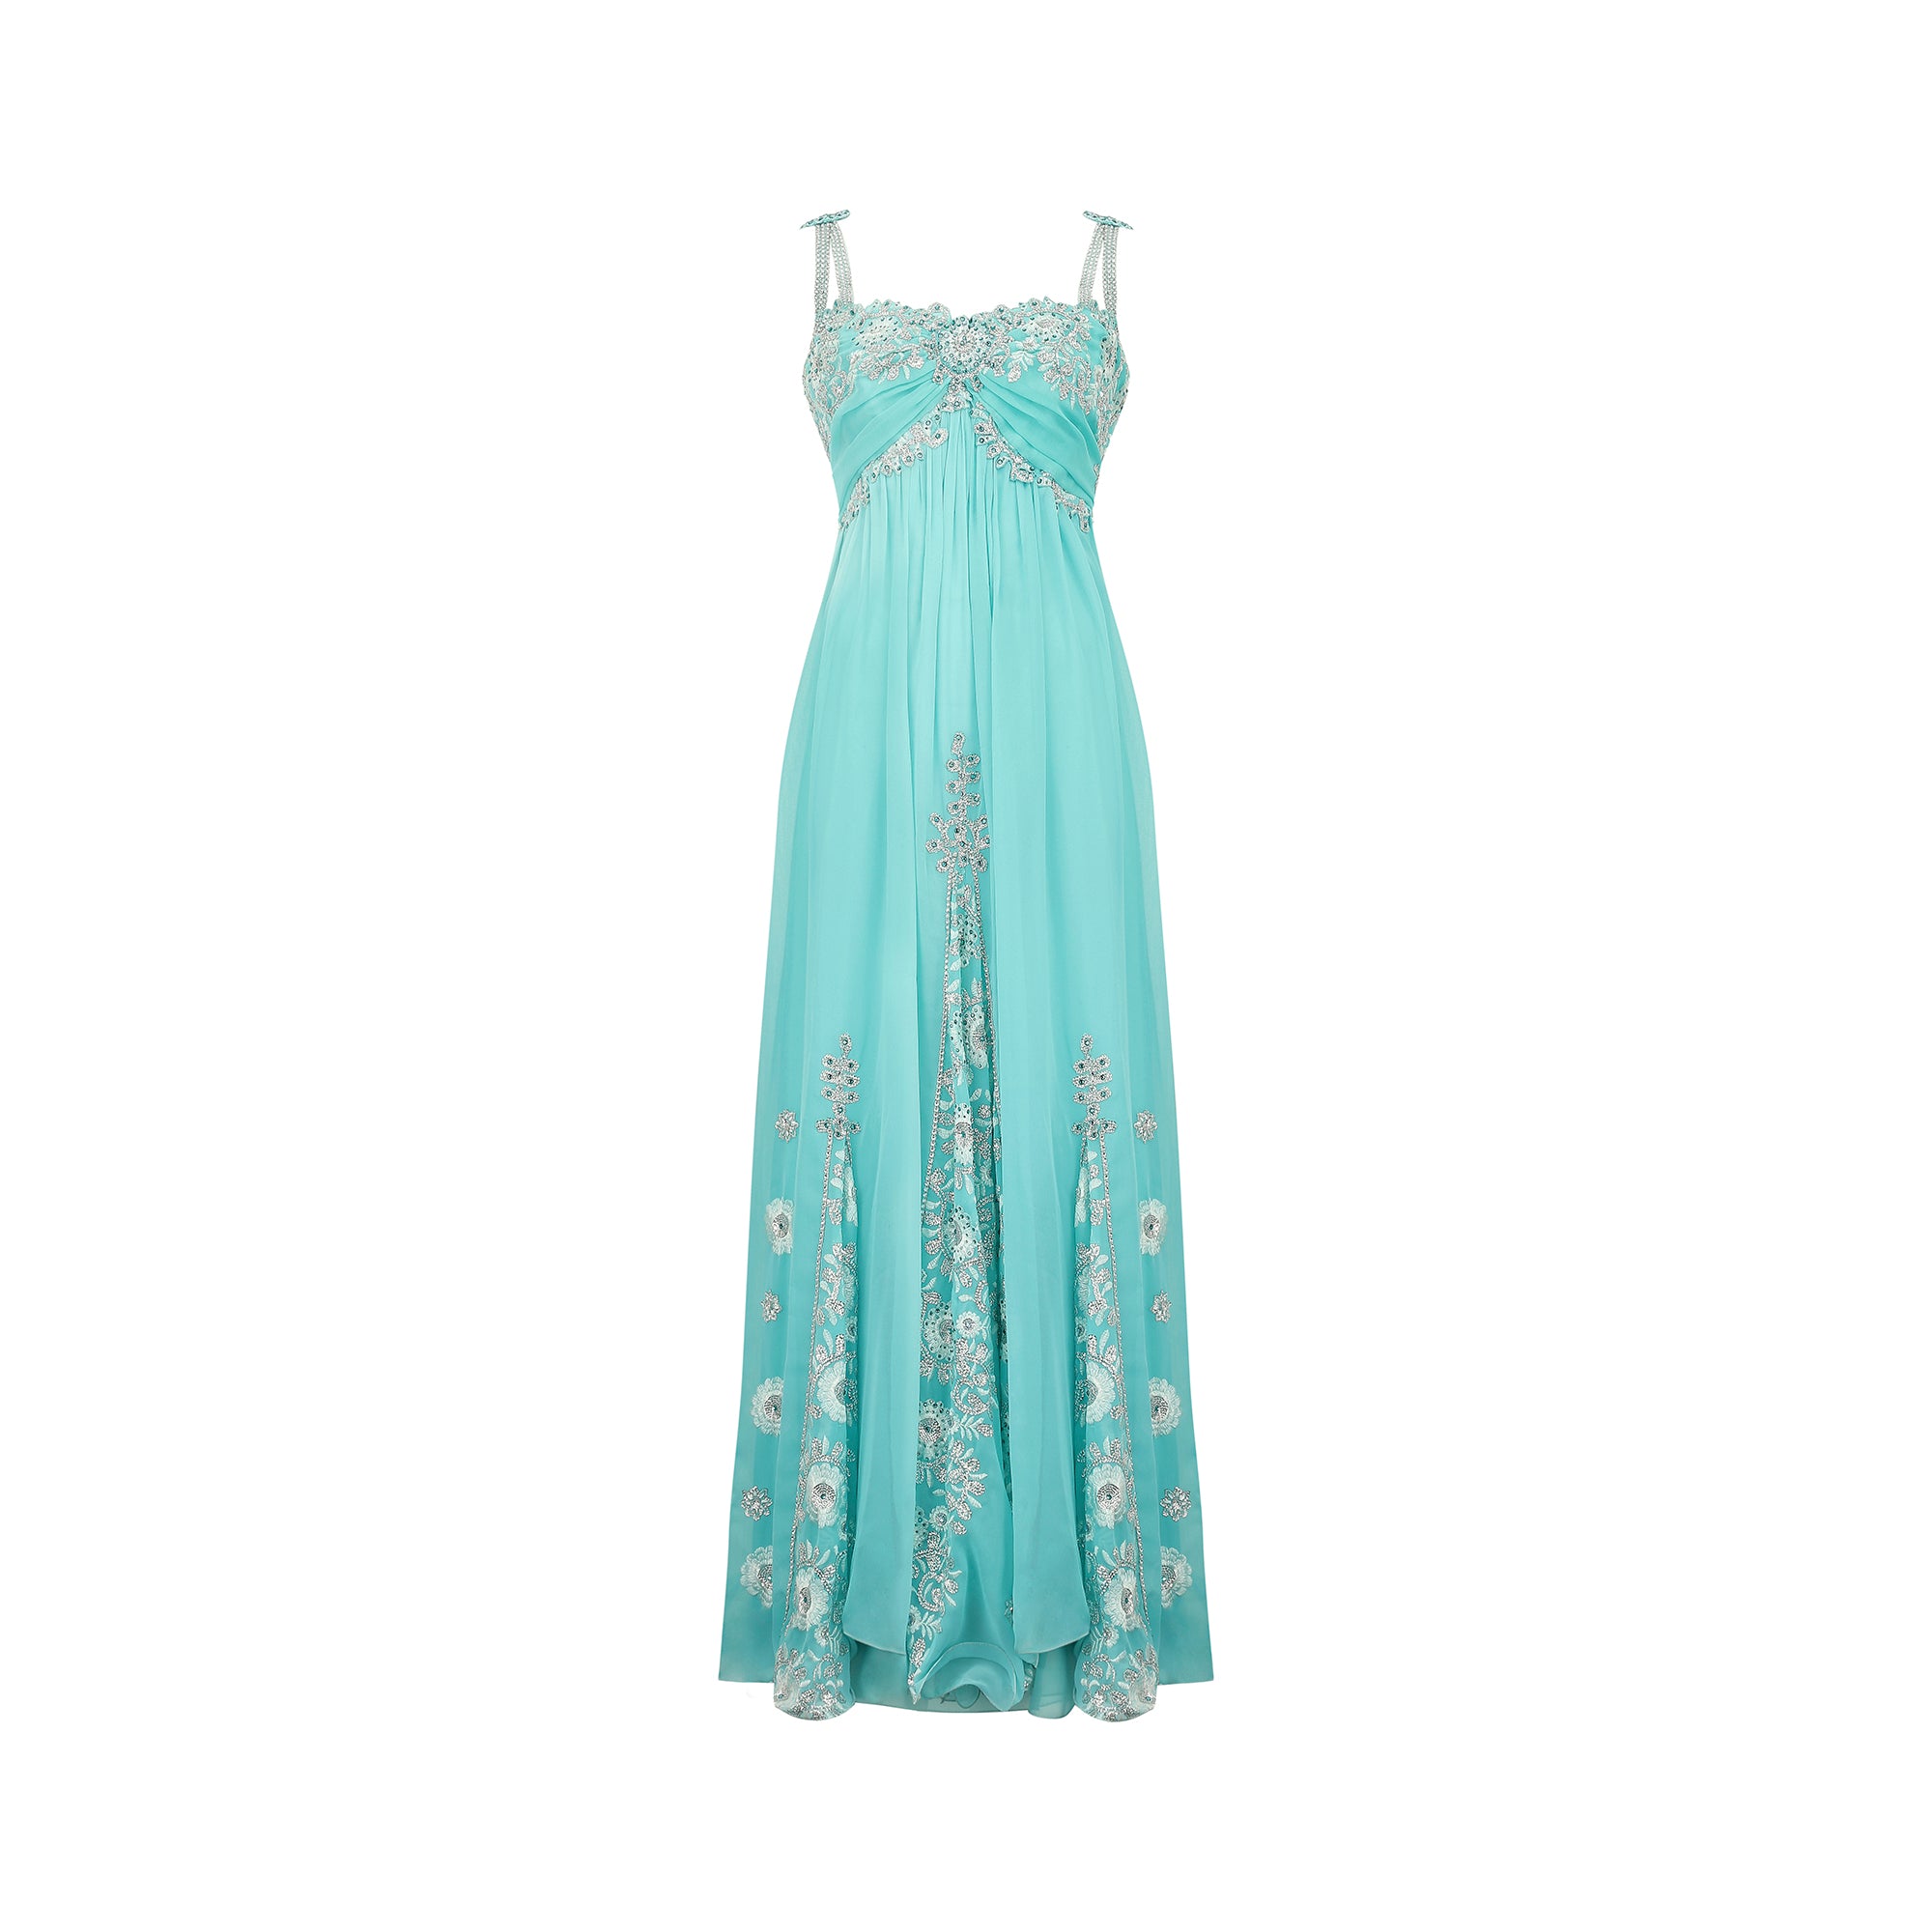 ARCHIVE - 1990s Bespoke Turquoise Sequinned and Embroidered Dress